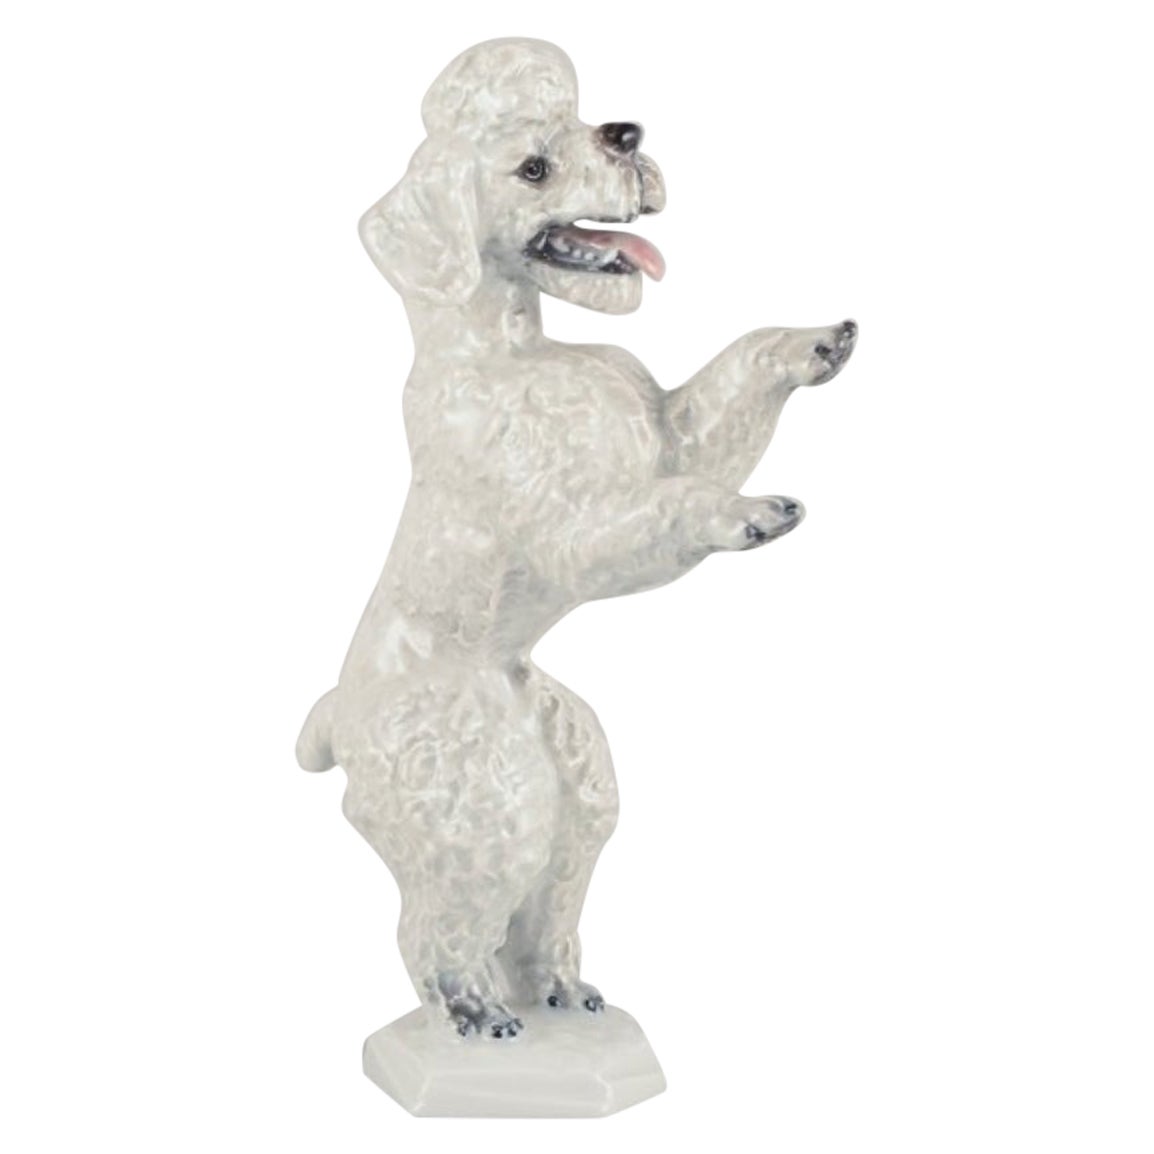 Fritz Heidenreich for Rosenthal. Large standing porcelain poodle. Approx. 1930s